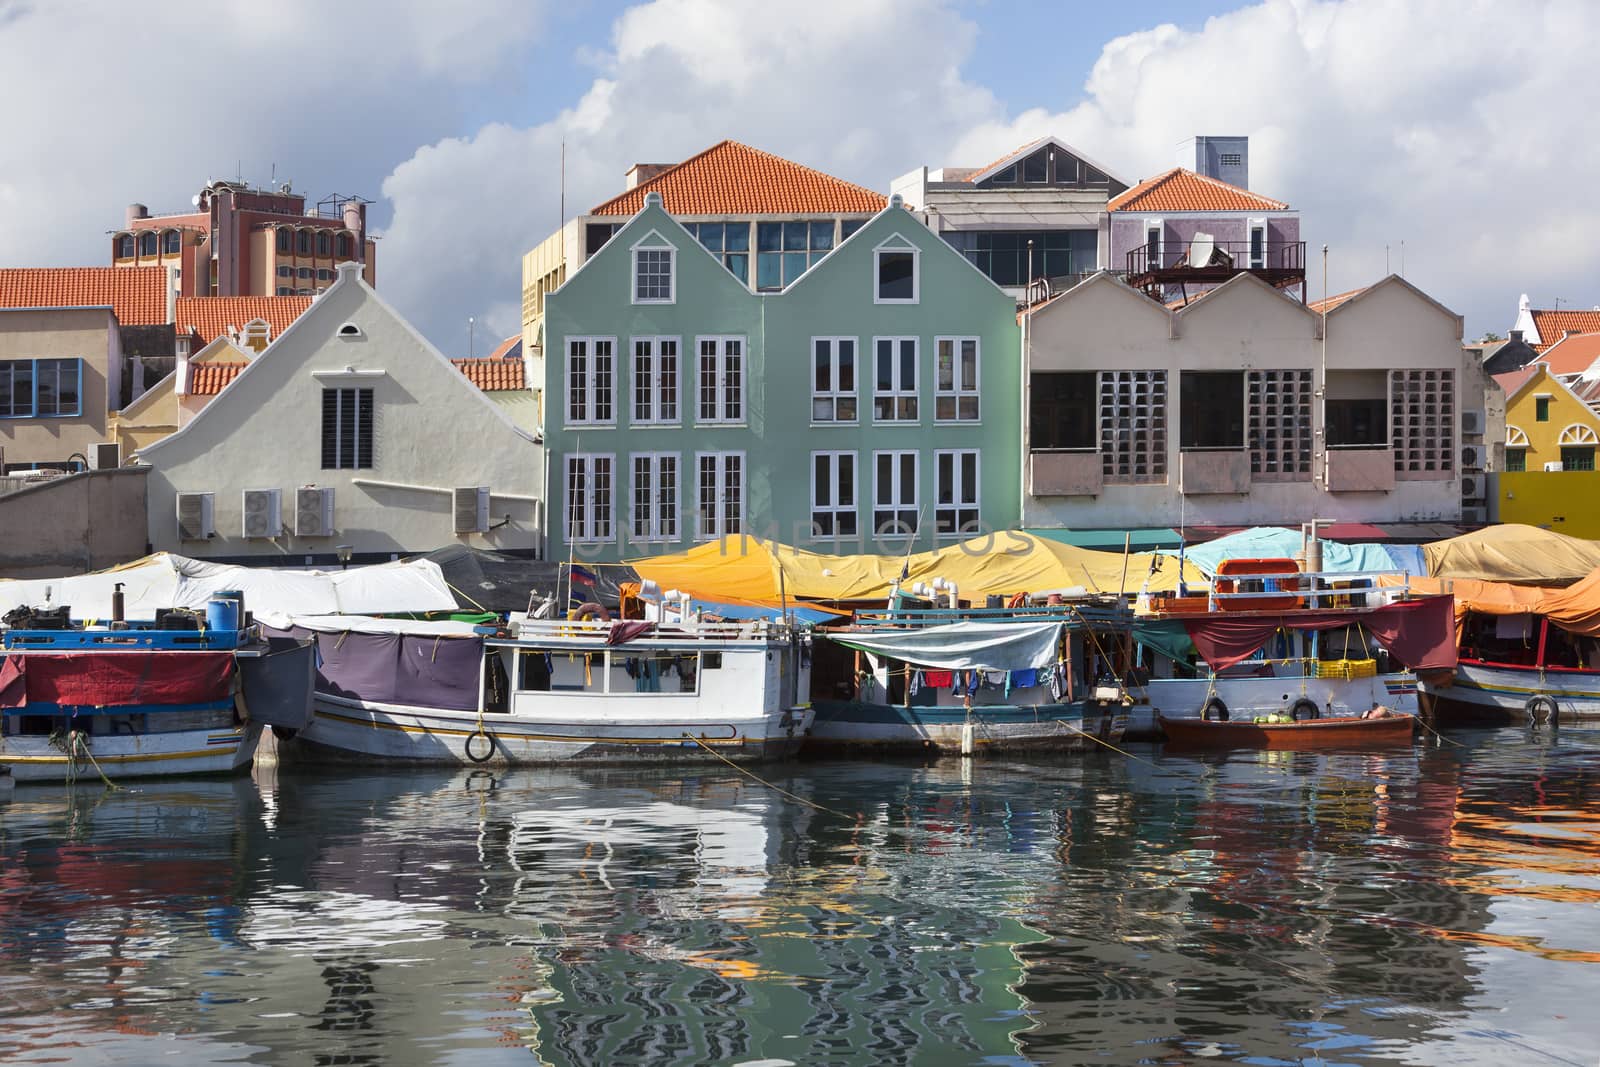 Colorful floating fruit market in Willemstad on Curacao